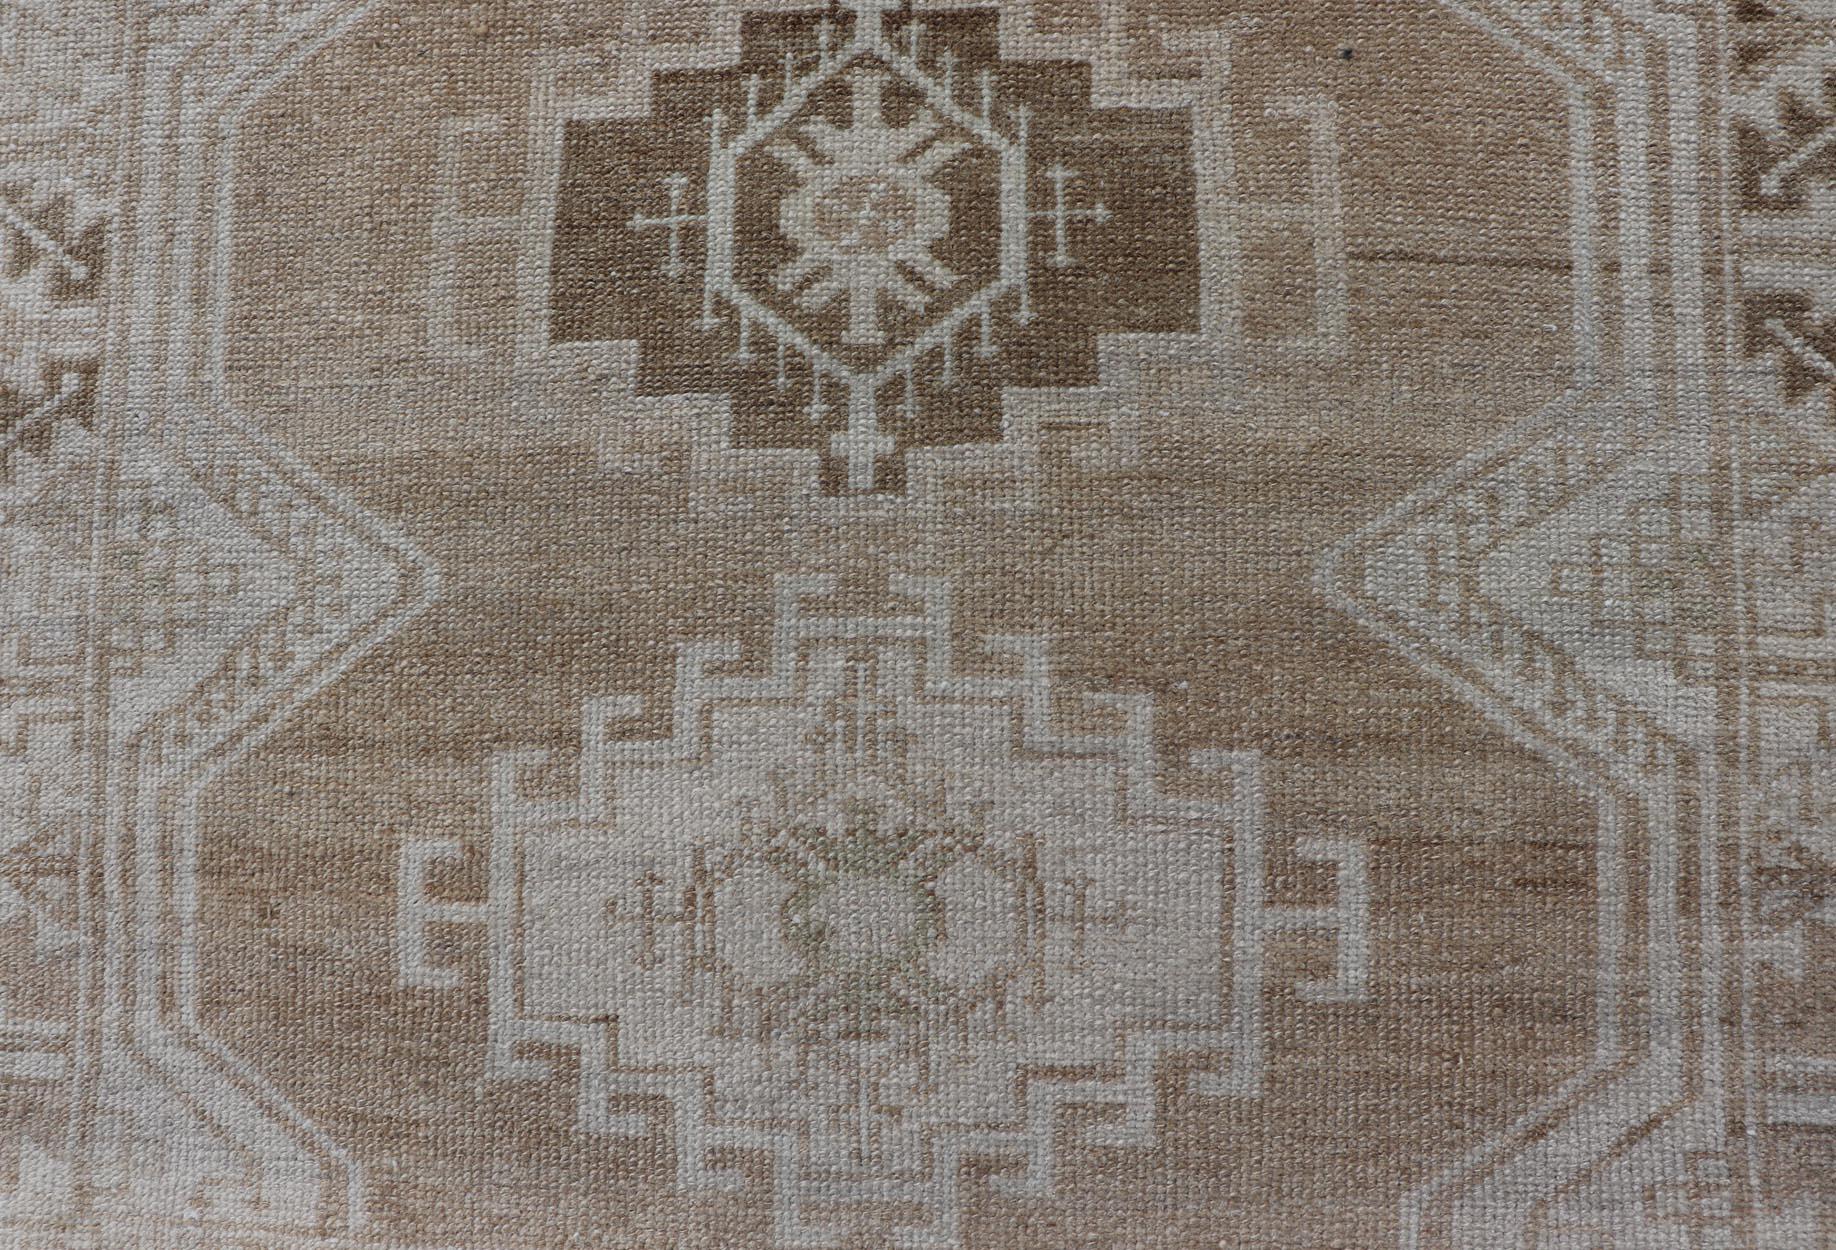 Antique Persian Malayer Runner All-Over  With Medallion Design in Earth Tones In Good Condition For Sale In Atlanta, GA